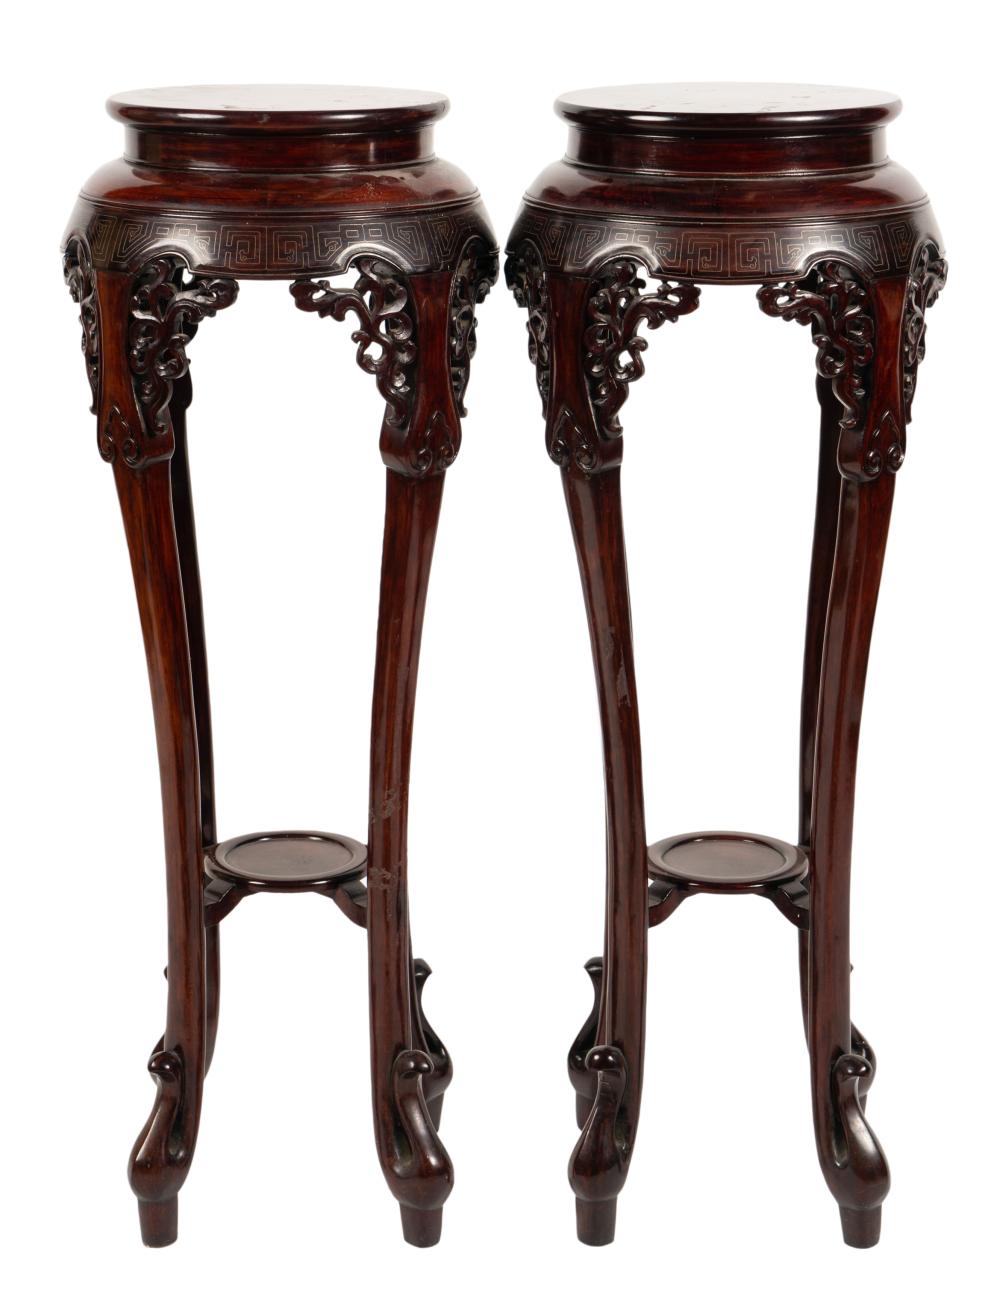 PAIR OF CHINESE CARVED HARDWOOD